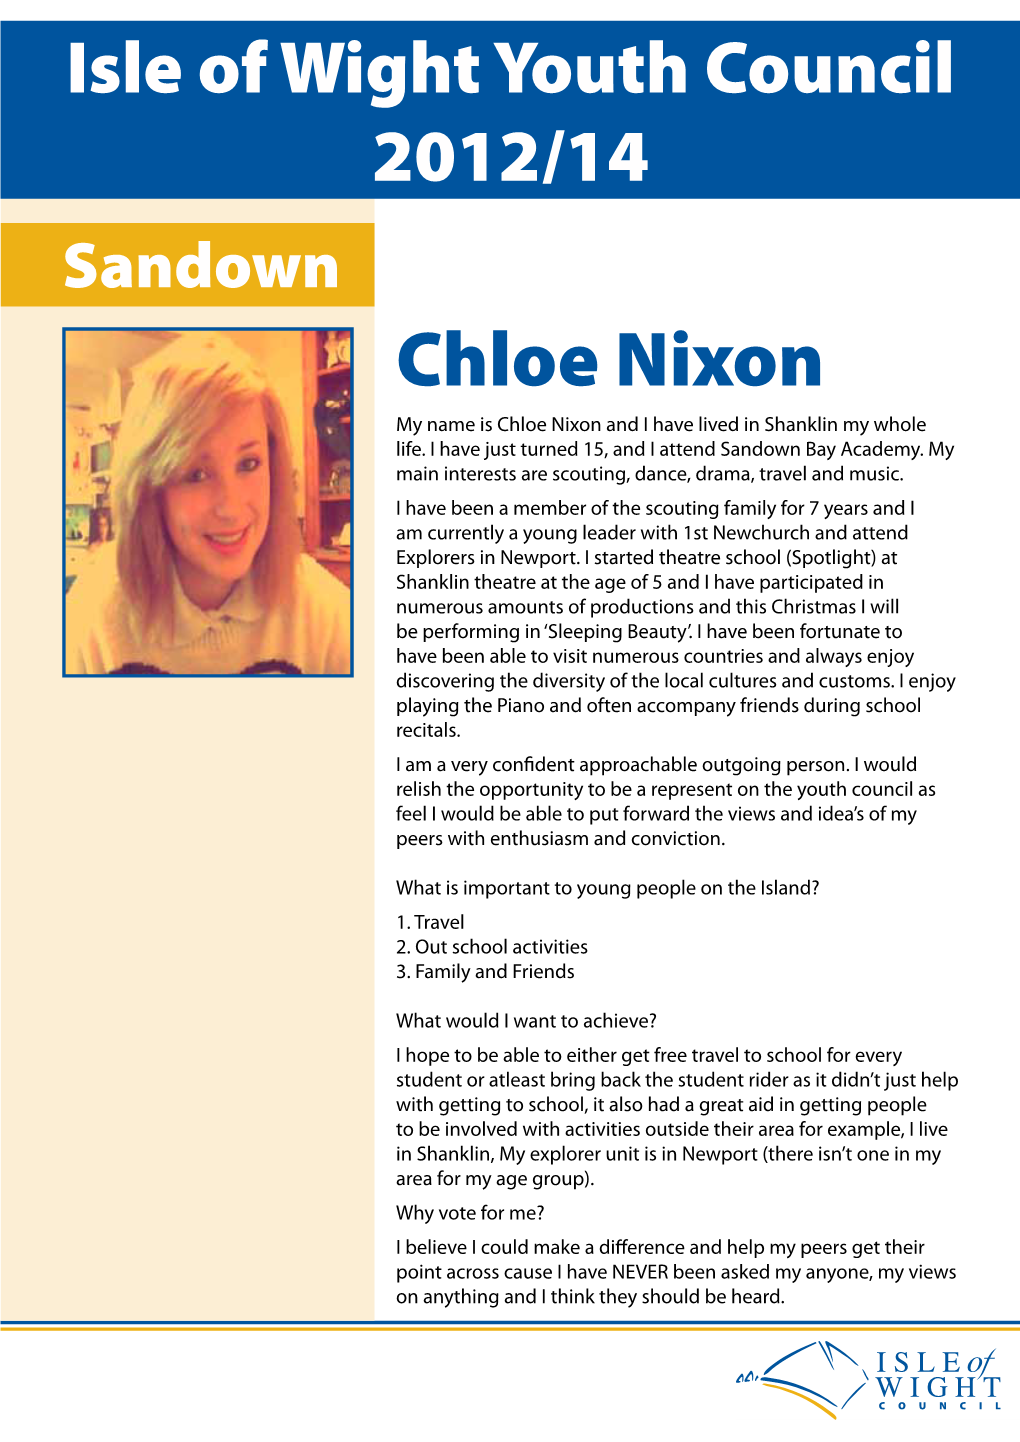 Chloe Nixon My Name Is Chloe Nixon and I Have Lived in Shanklin My Whole Life